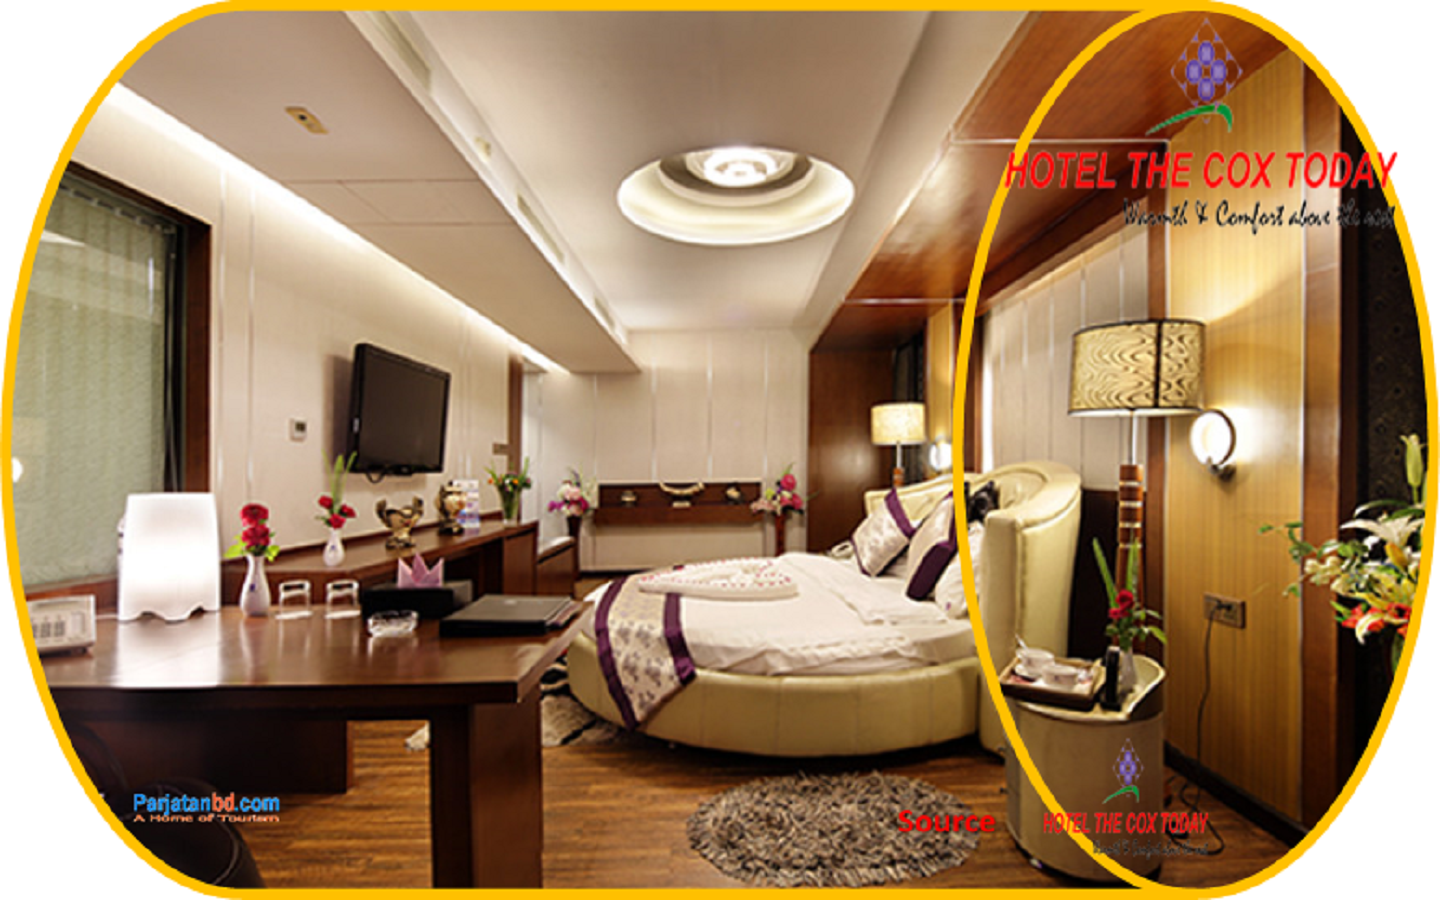 Room Presidential Suite -1, Hotel The Cox Today, Coxs Bazar